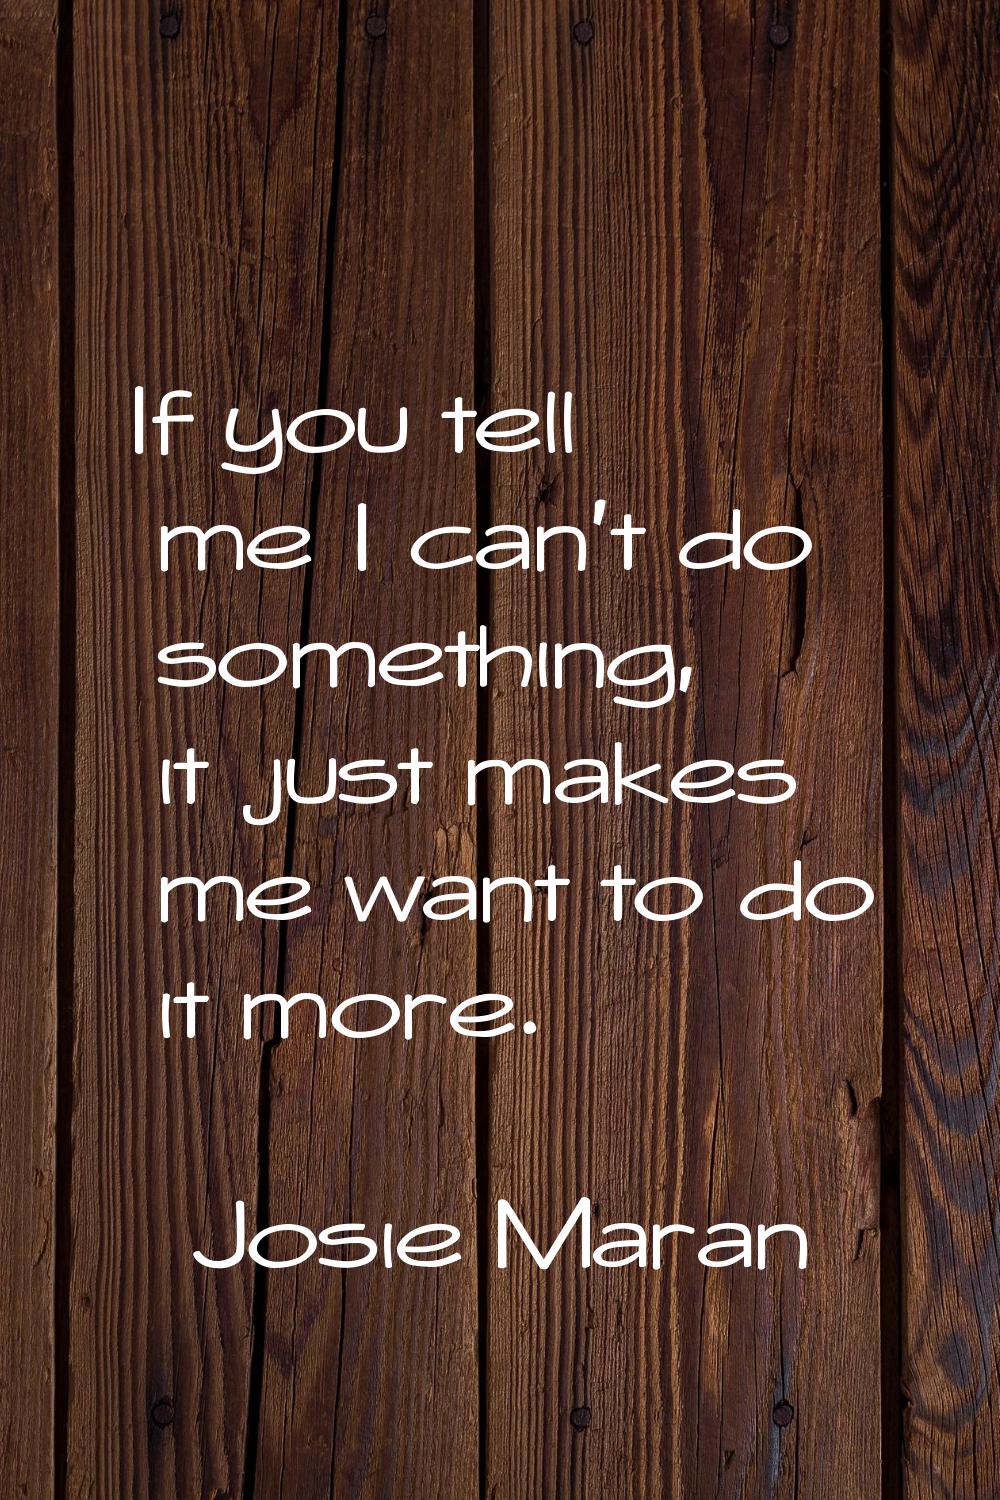 If you tell me I can't do something, it just makes me want to do it more.